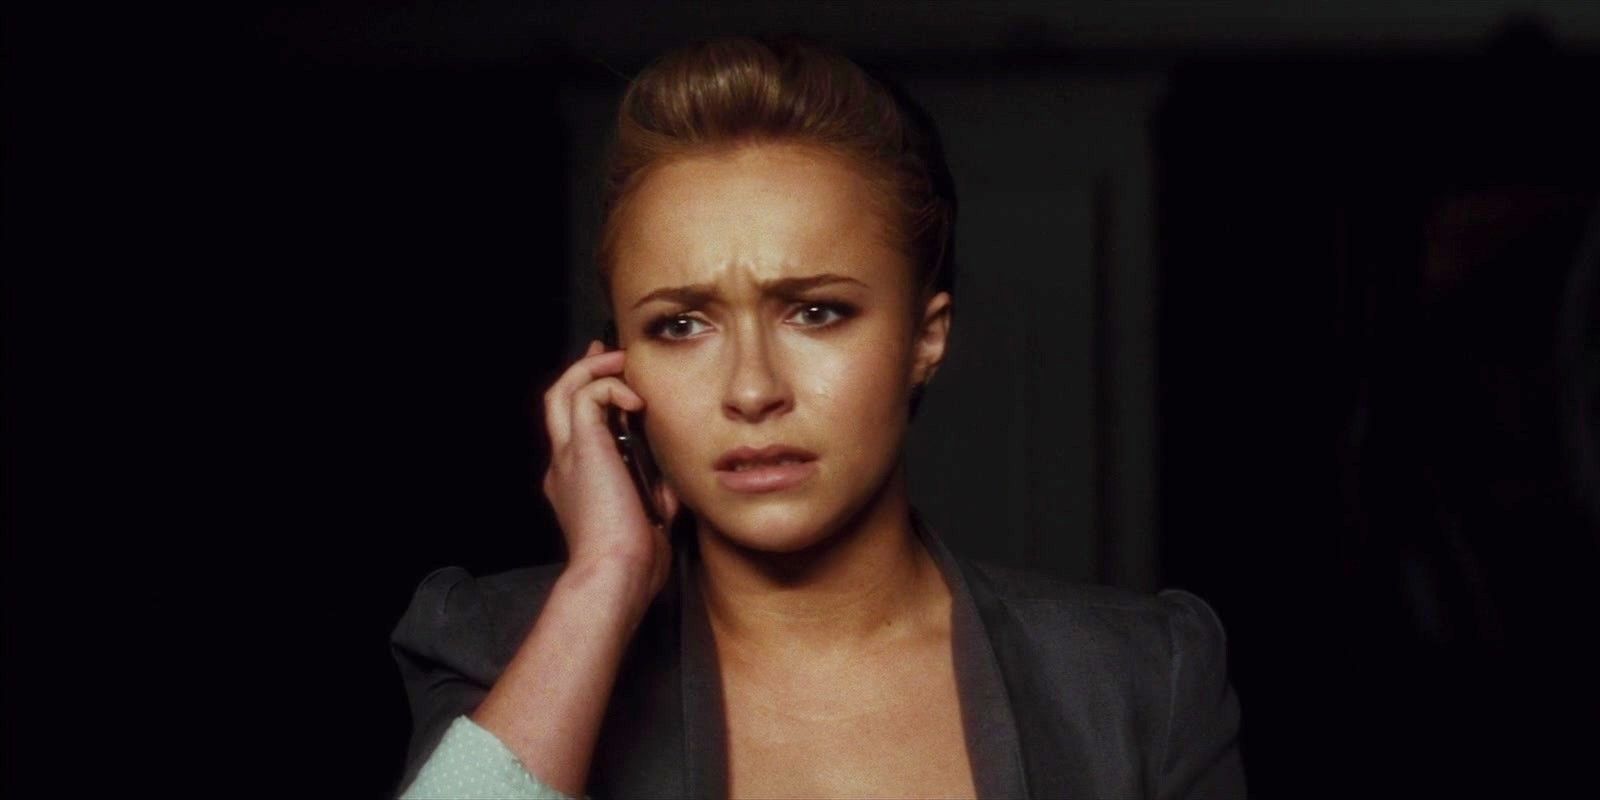 Hayden-Panettiere-Kirby-Reed-Scream-4-social featured